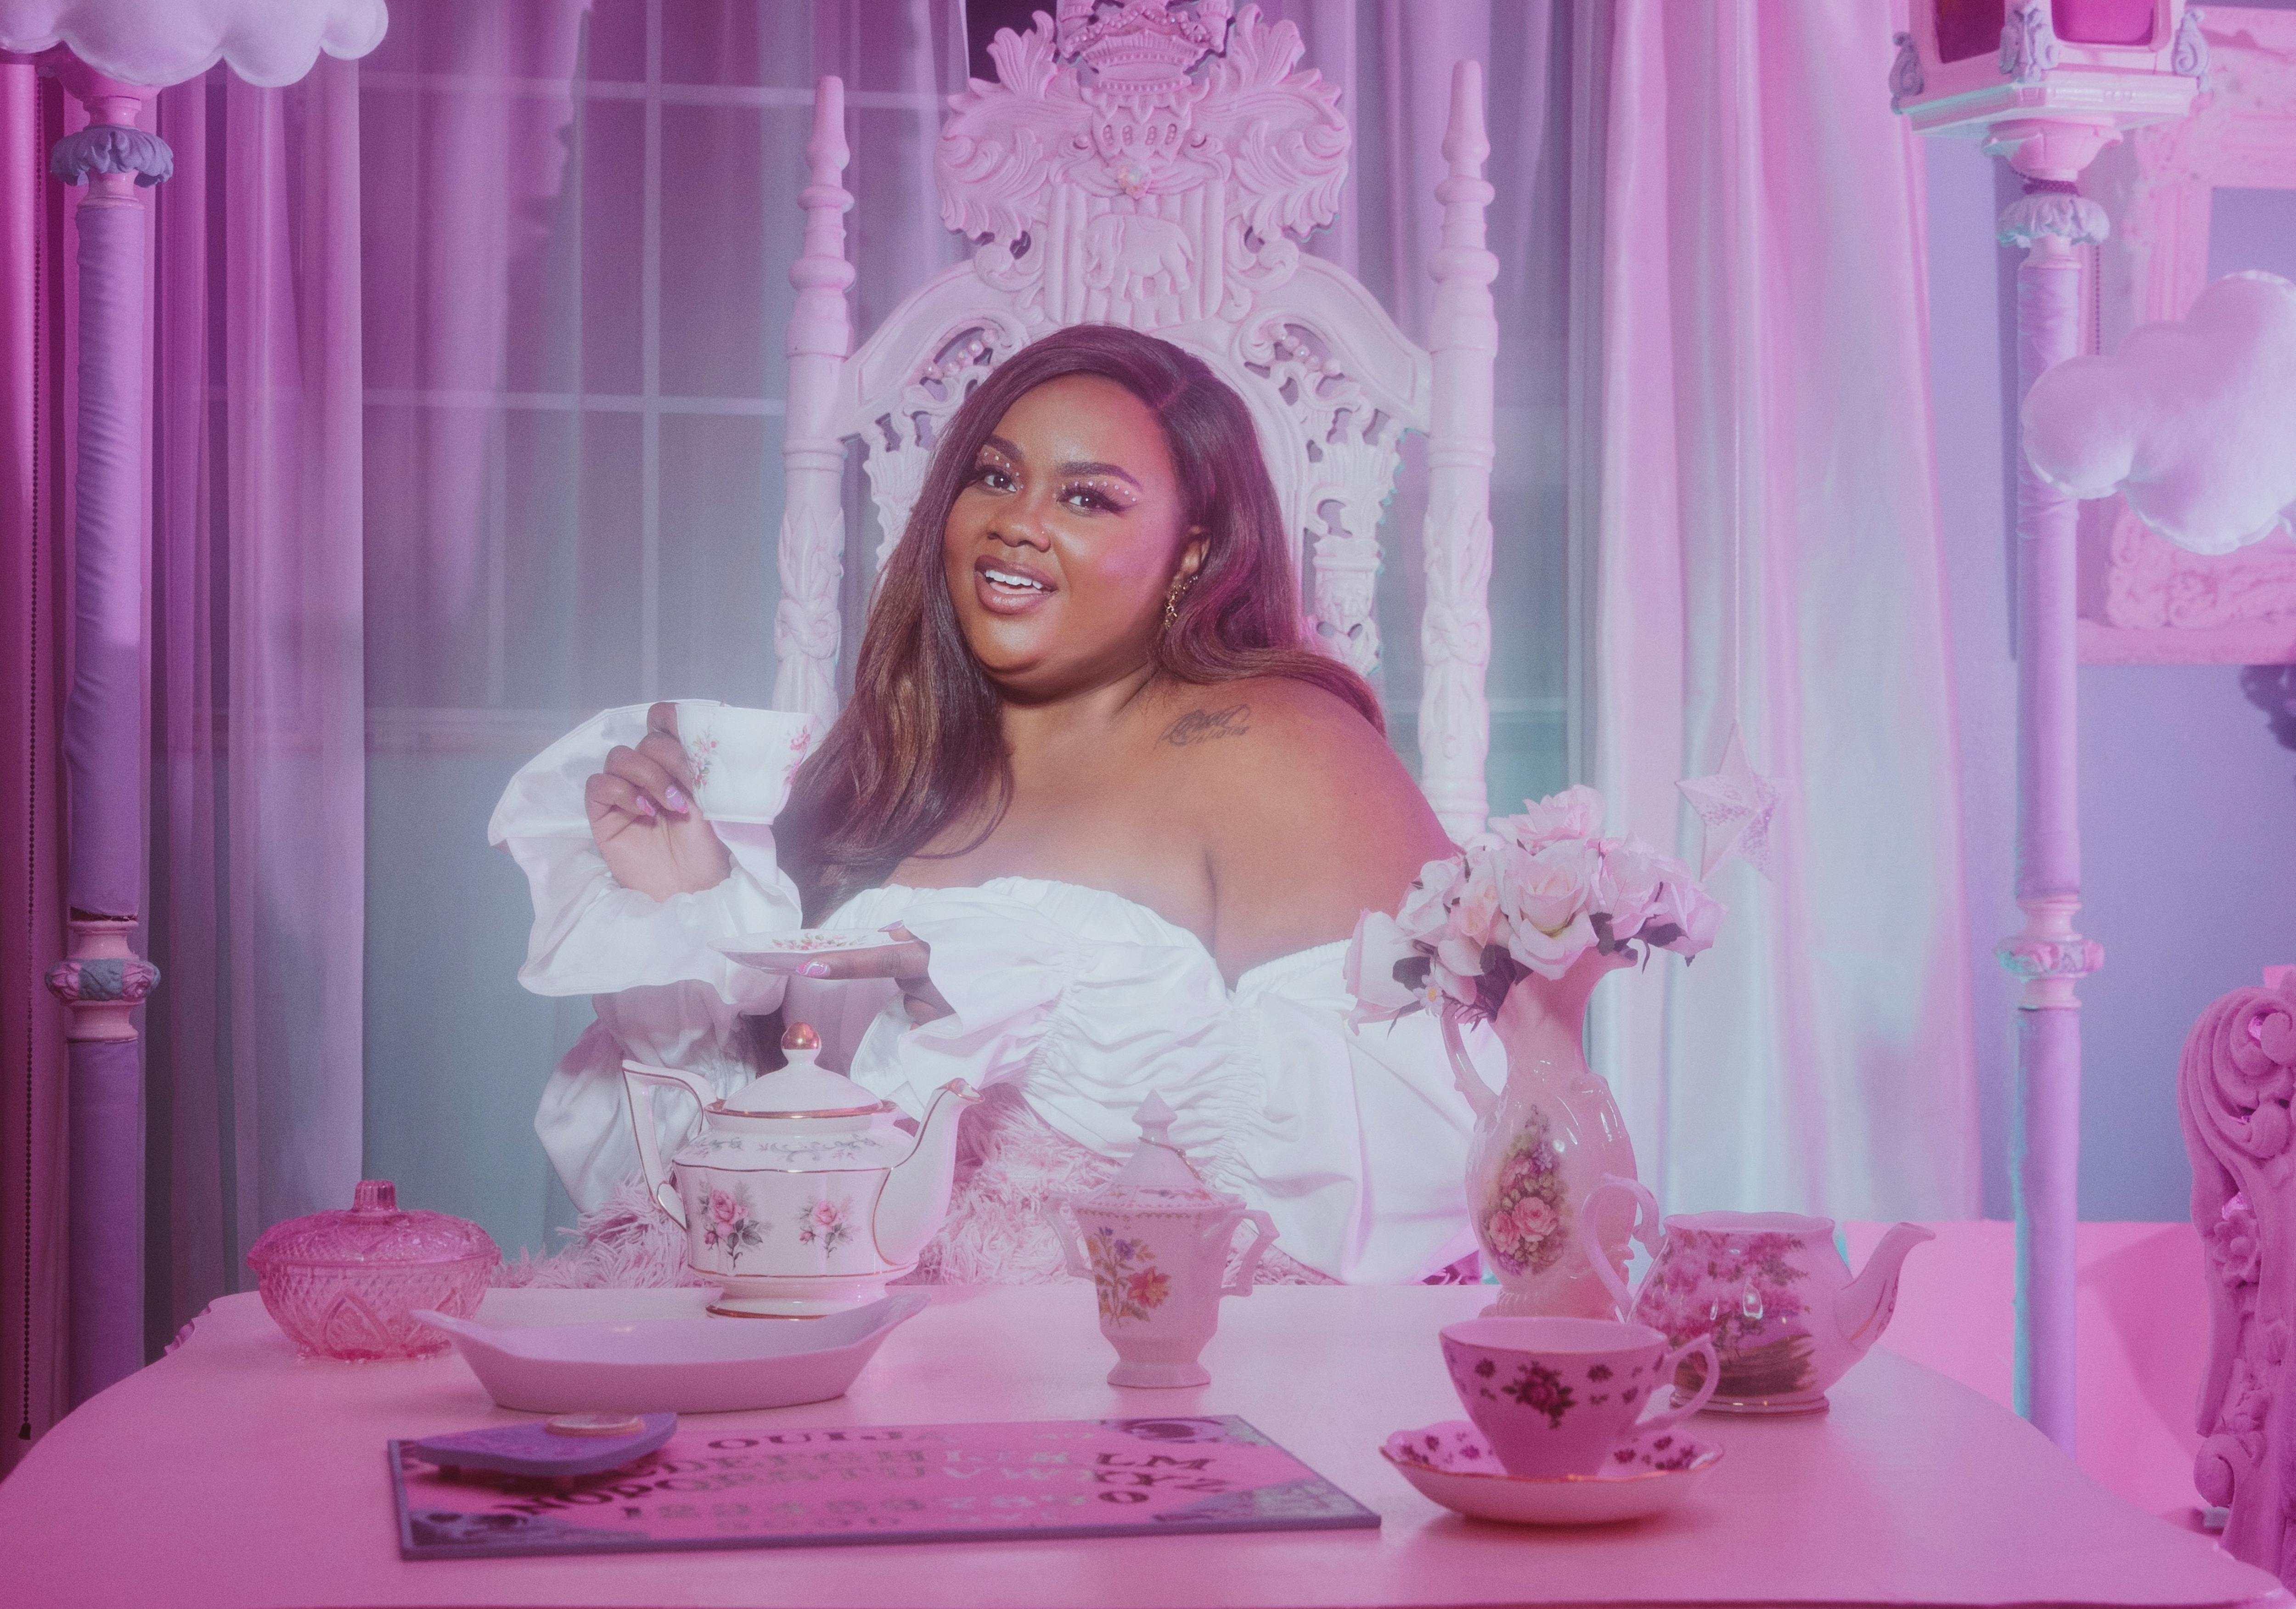 Nicole Byer looks positively ethereal in a white dress in this pink and blue gauzy shot.